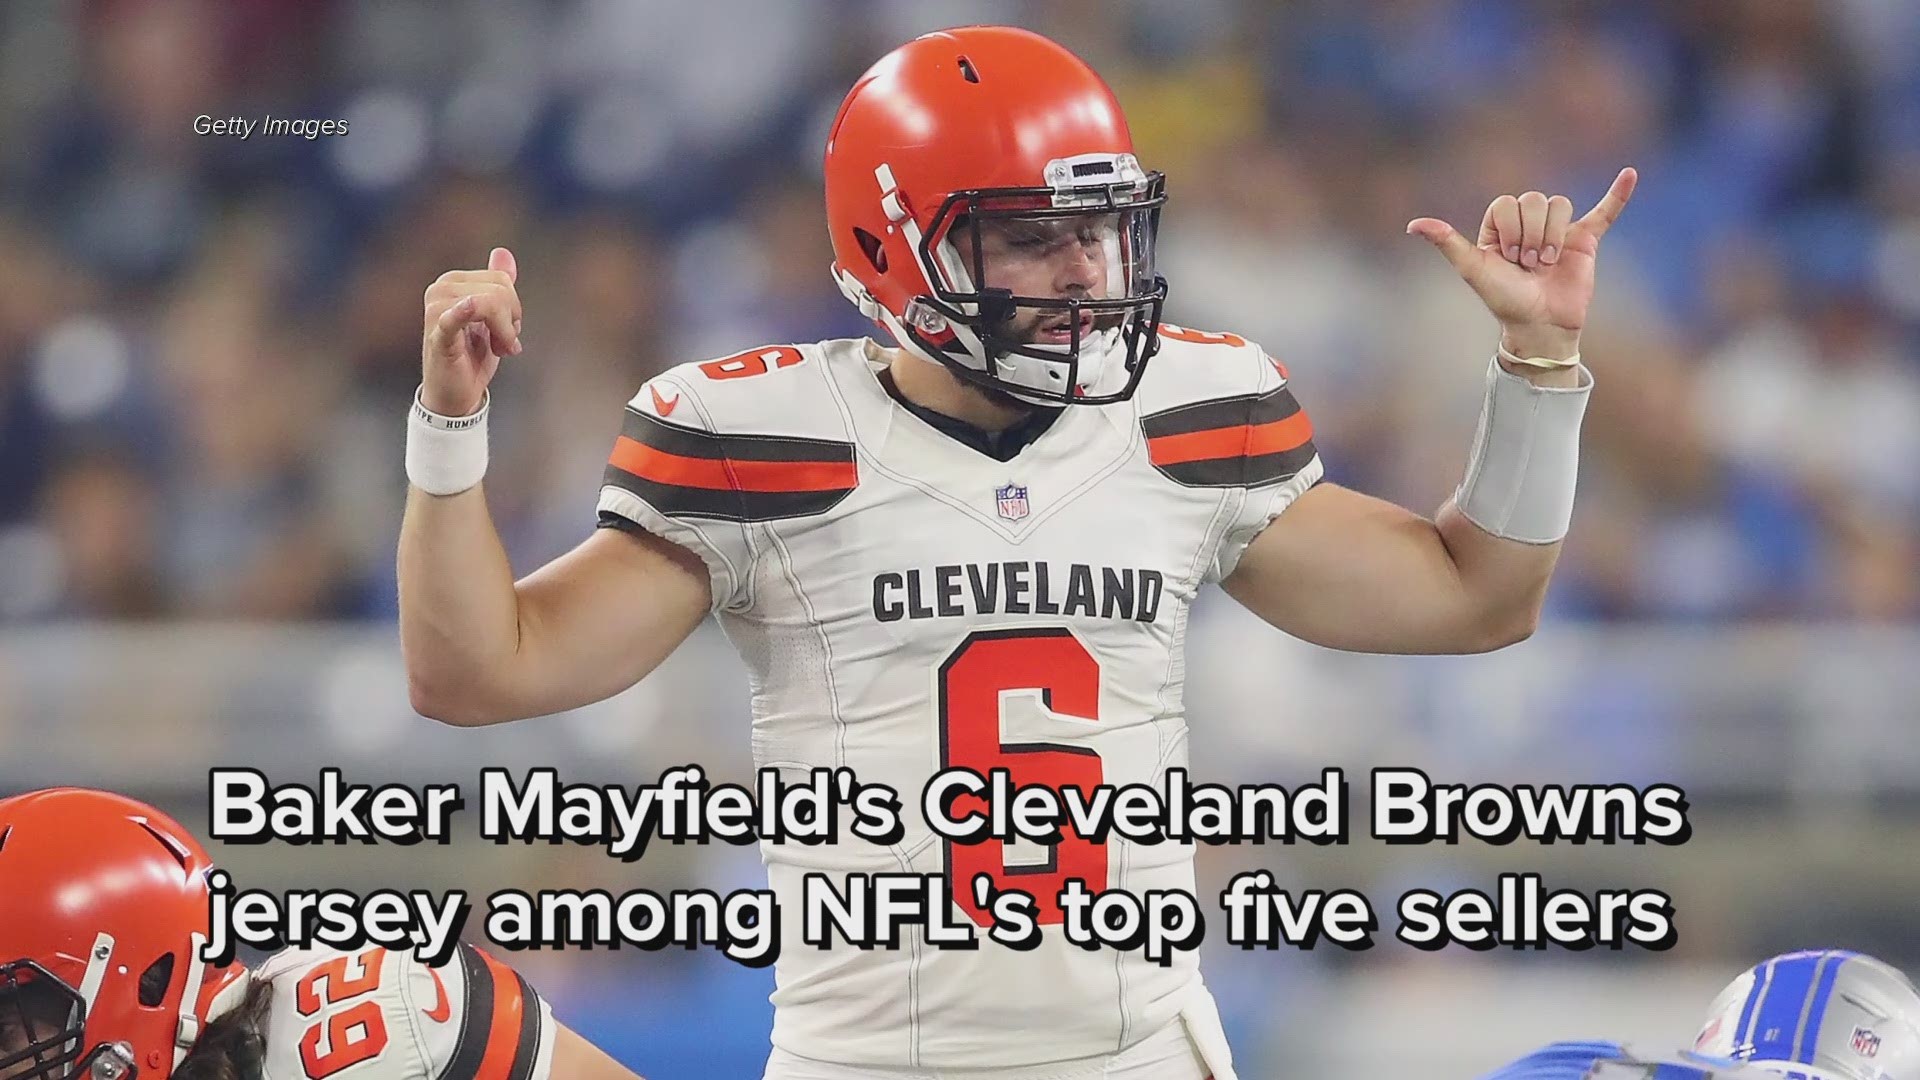 Baker Mayfield's Cleveland Browns jersey among NFL's top five sellers